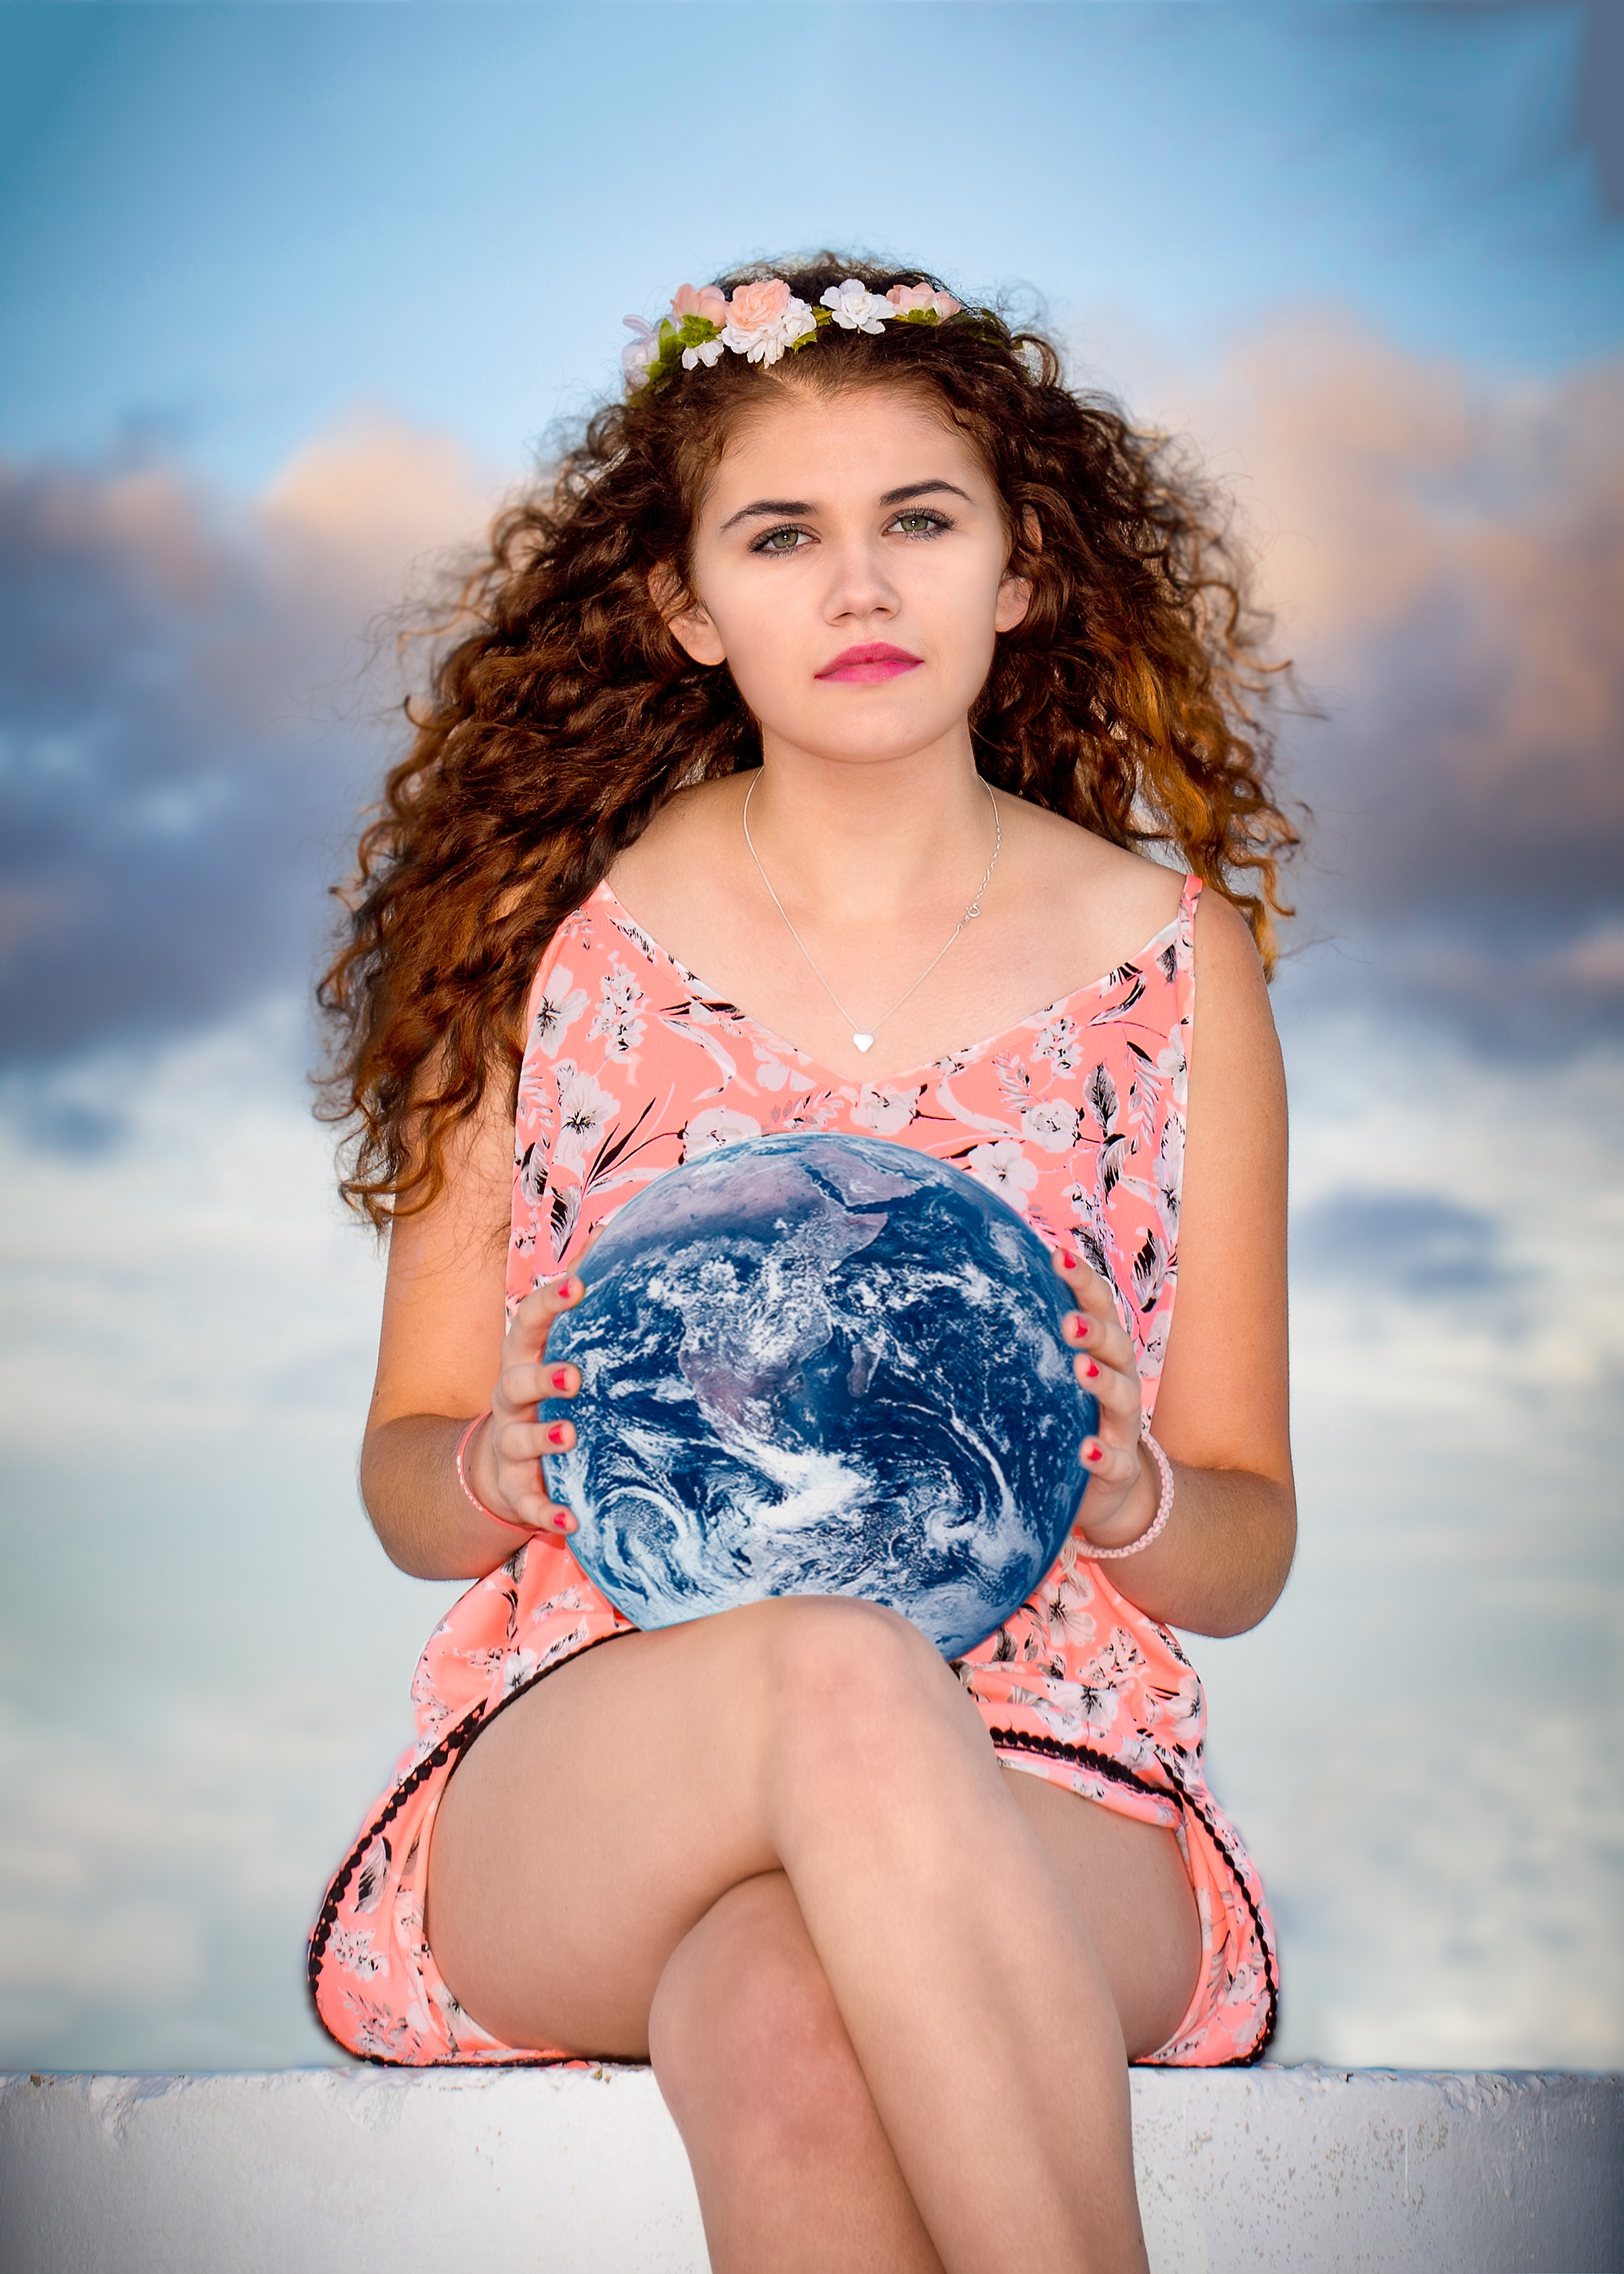 Woman wearing pink floral sleeveless romper sitting on gray concrete holding earth globe photo